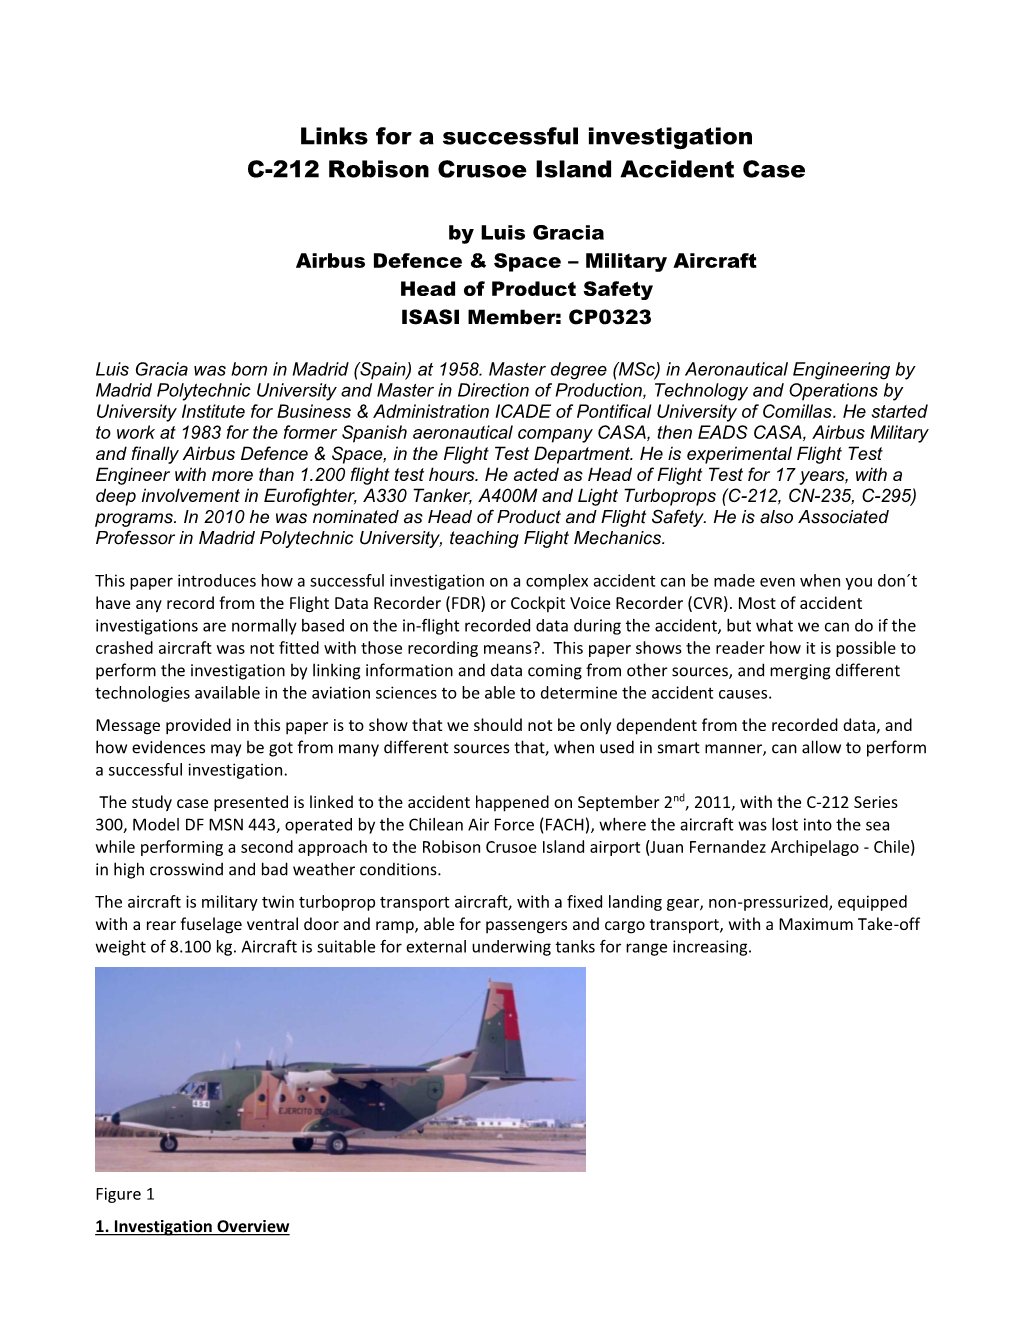 Links for a Successful Investigation C-212 Robison Crusoe Island Accident Case